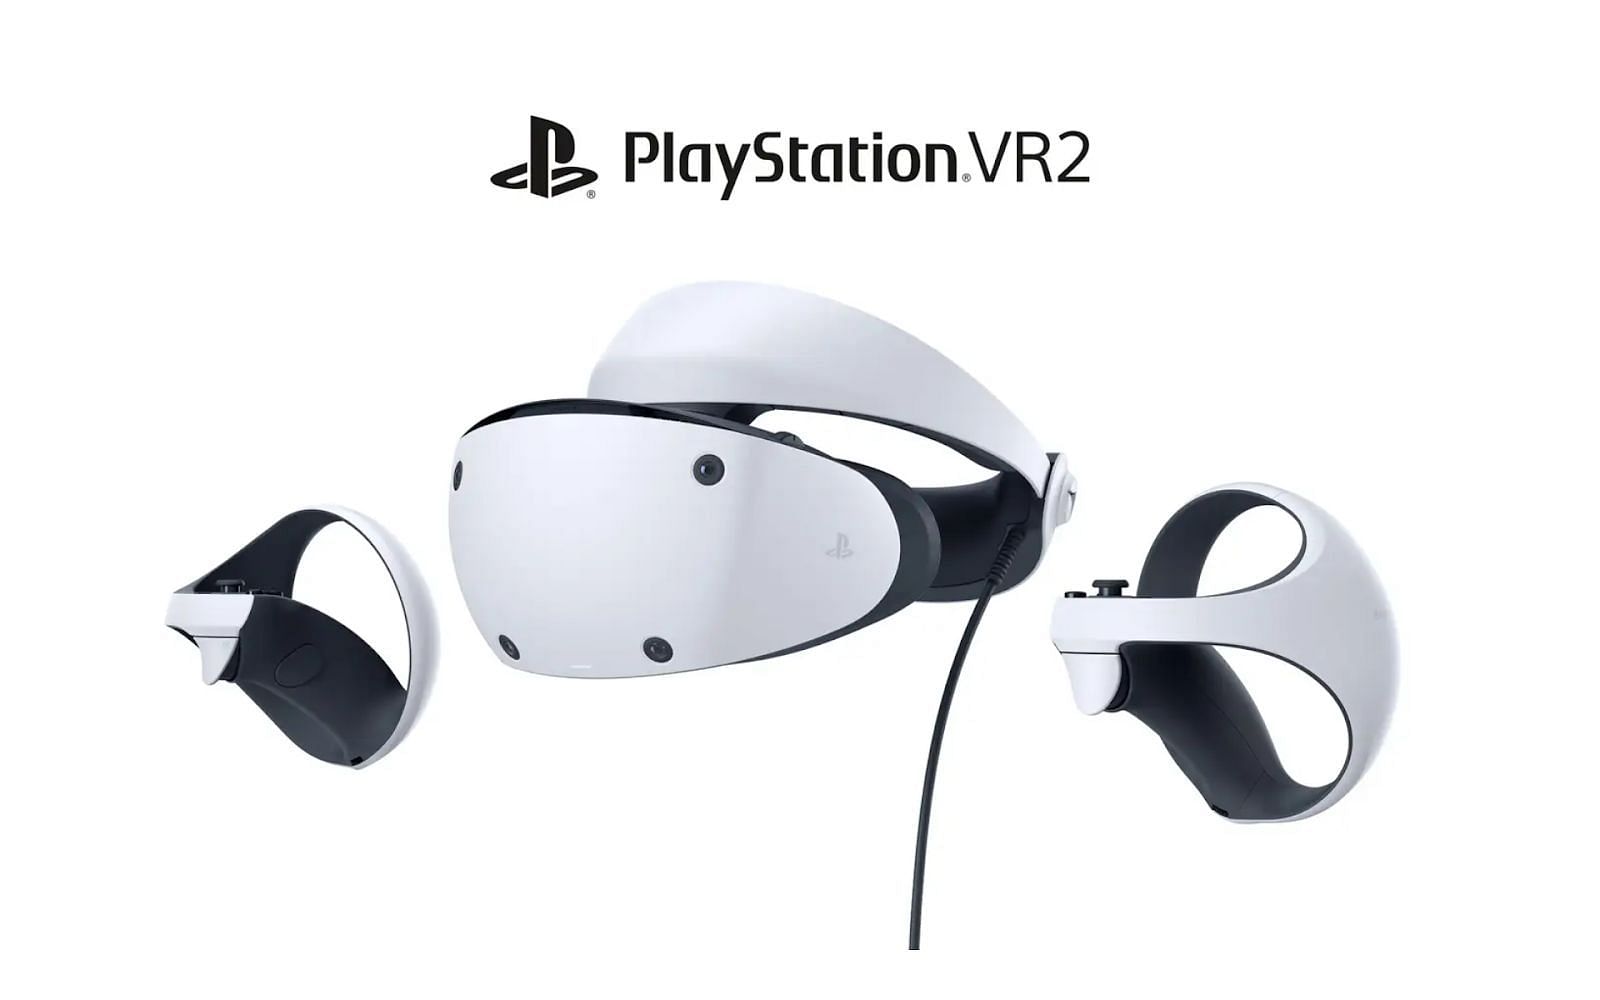 PlayStation VR2 embodies and refines the white aesthetics of PS5 (Image by PlayStation)